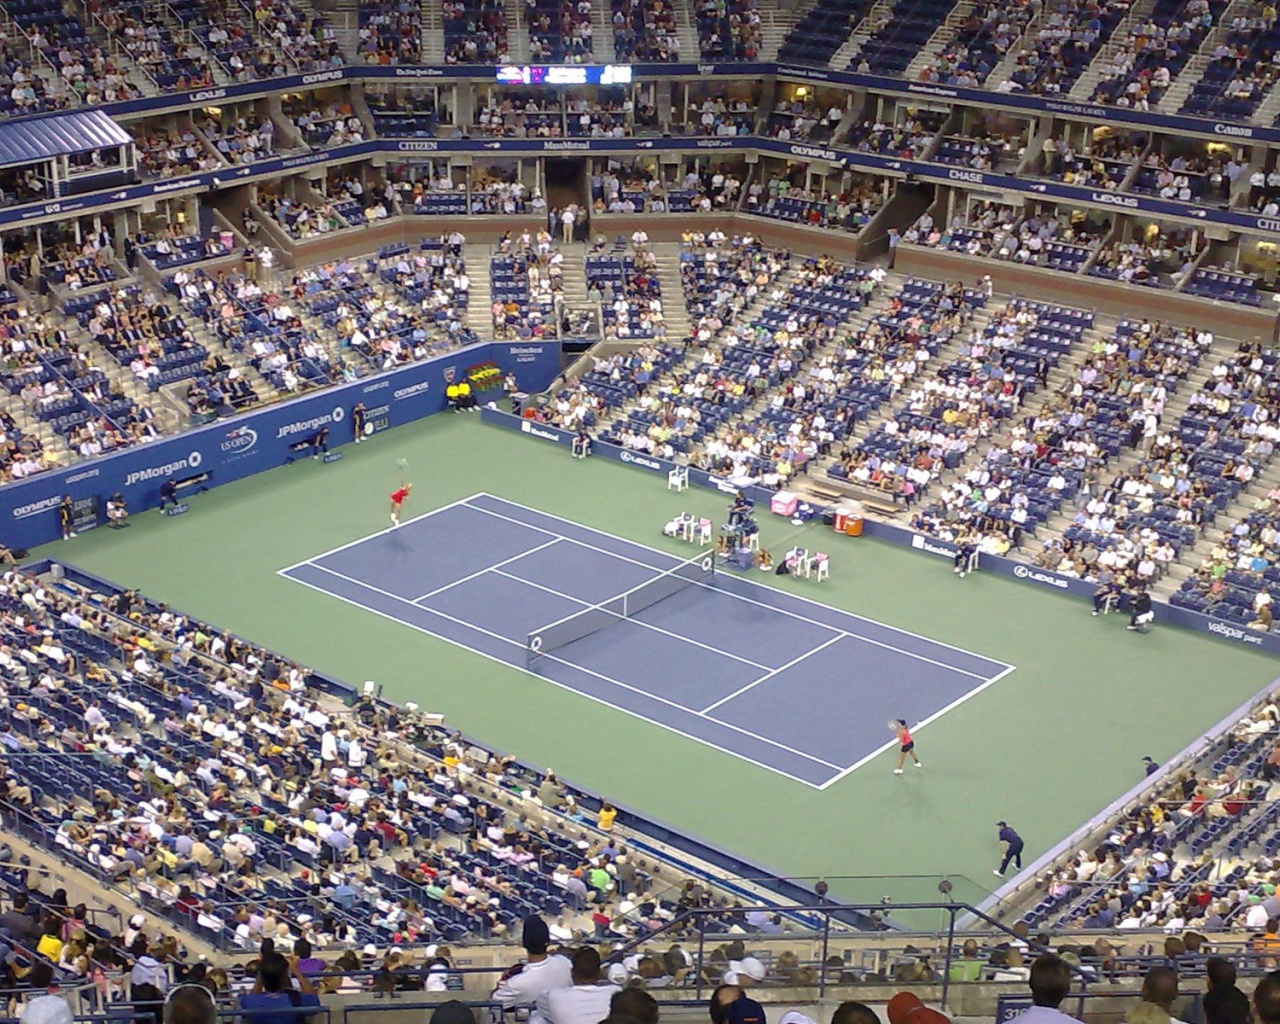 Tennis Match At The US Open